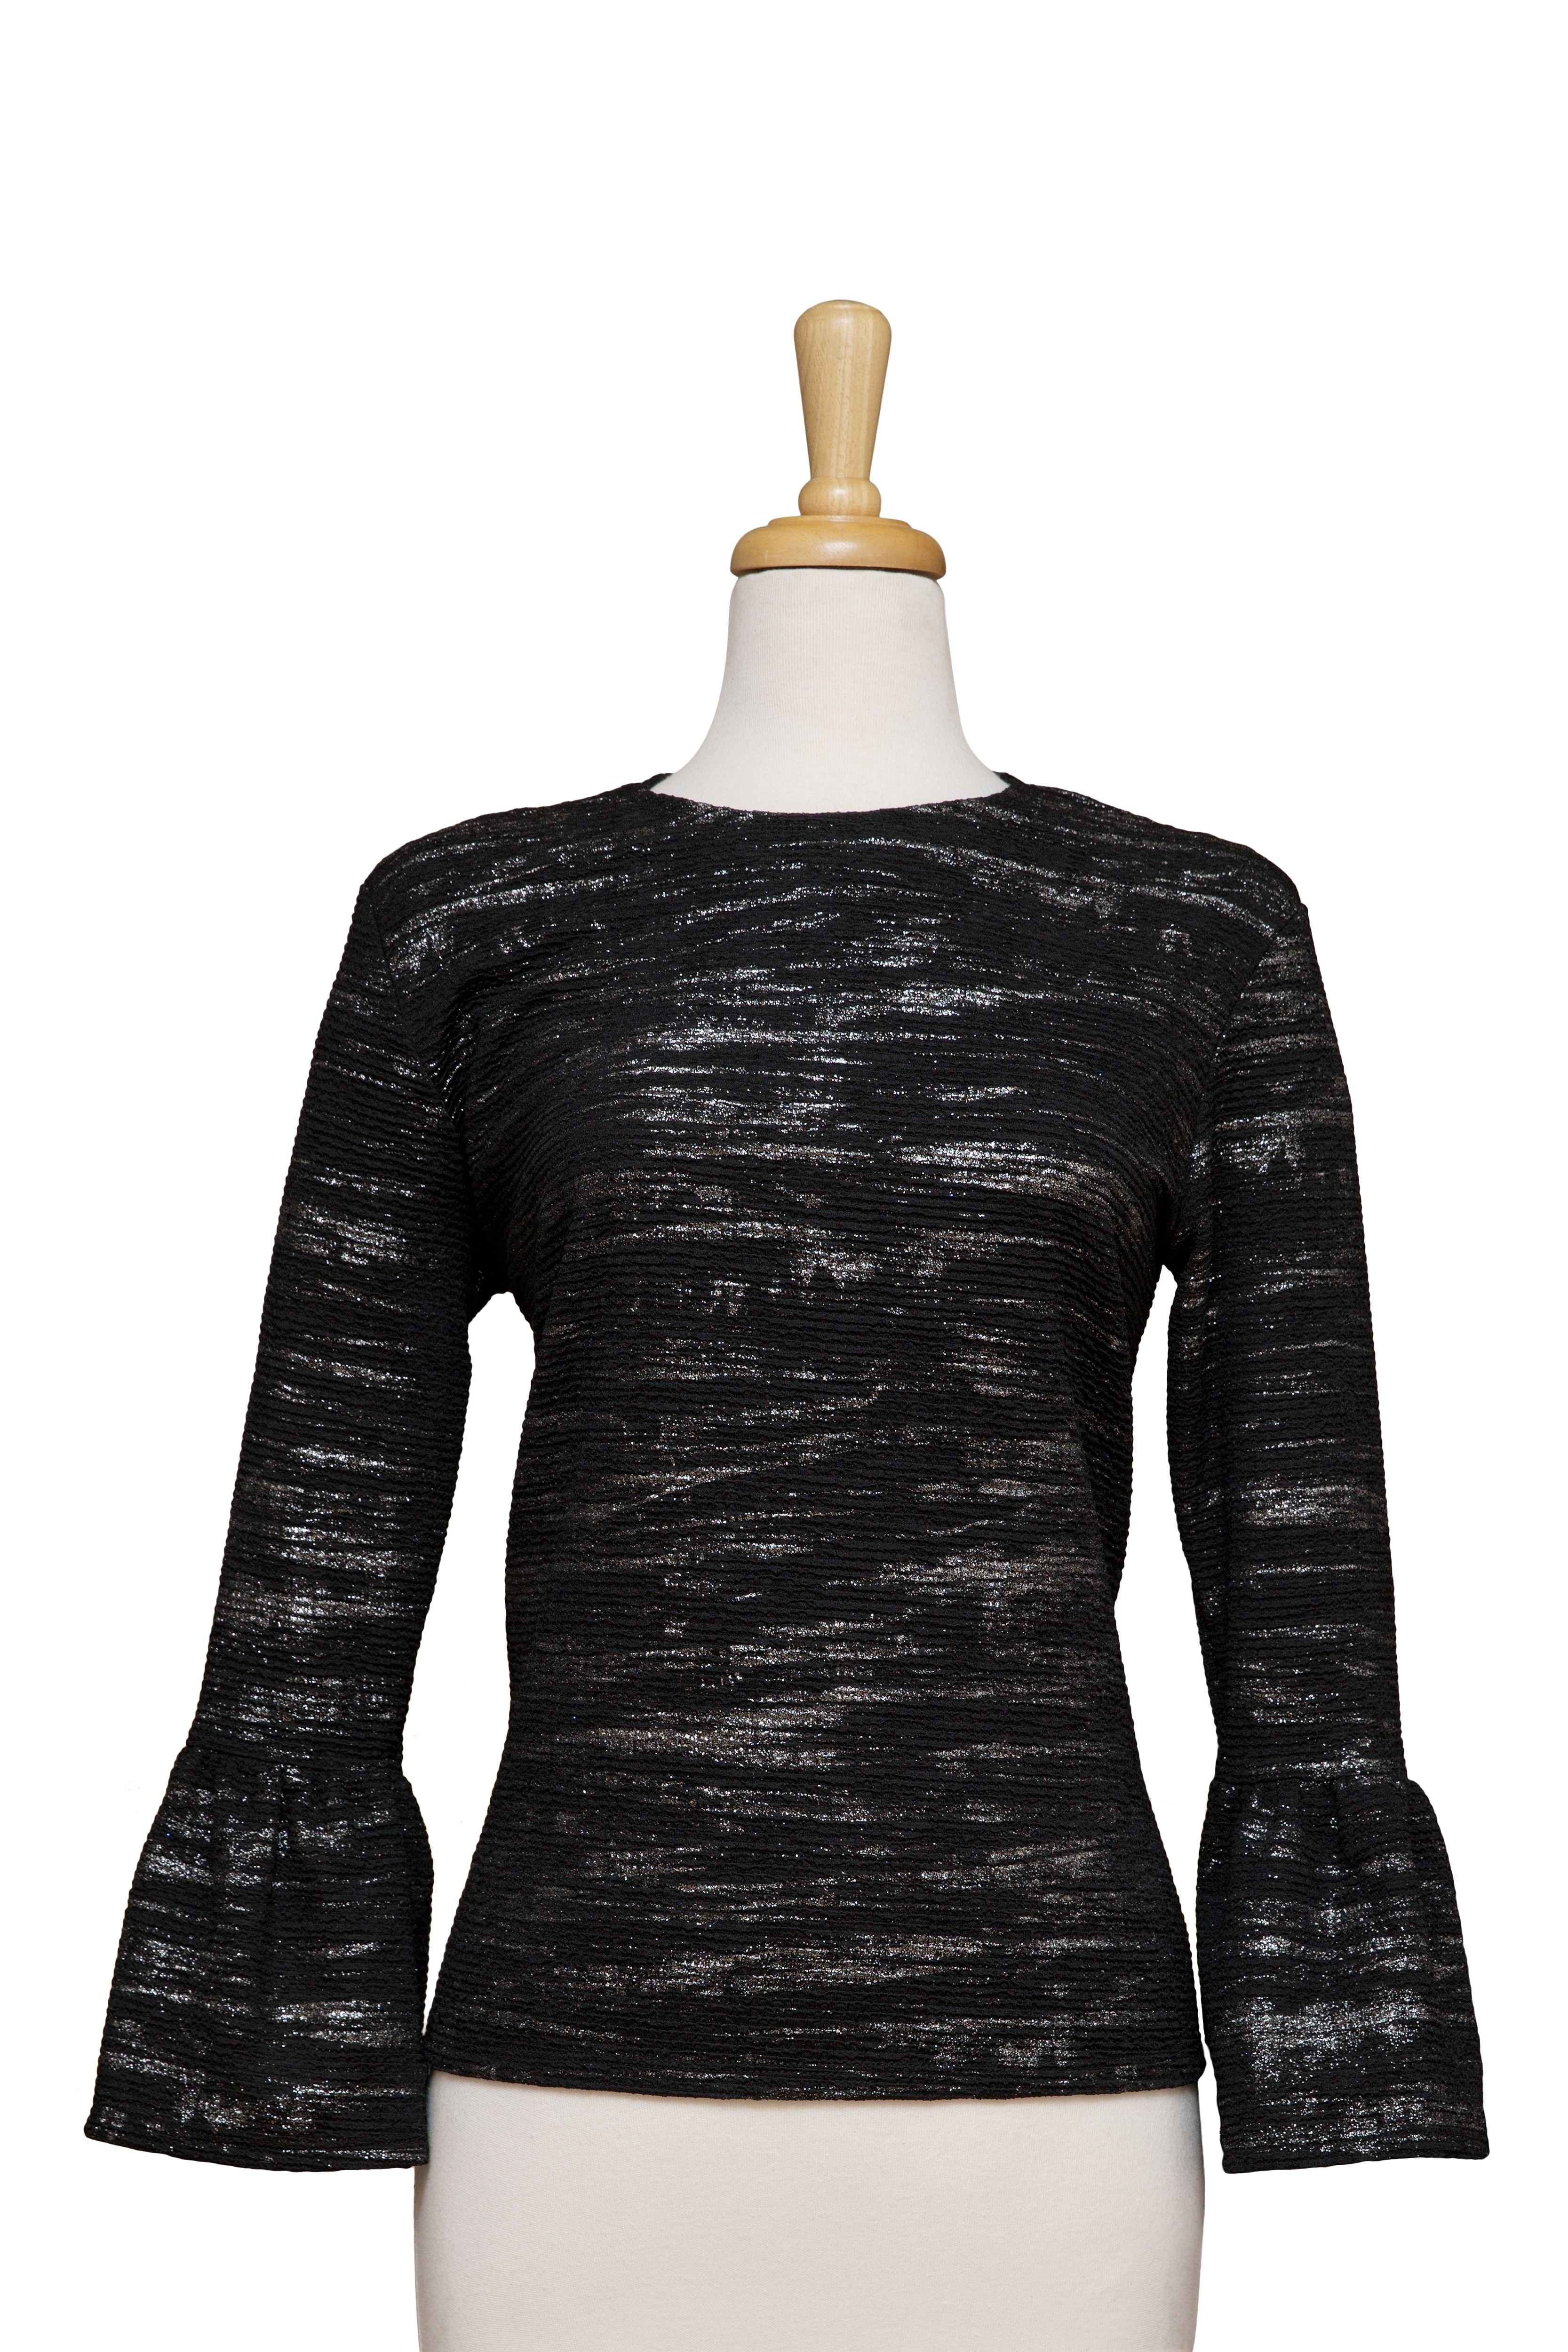 Black and Silver Crinkled Textured Bell Sleeve Top